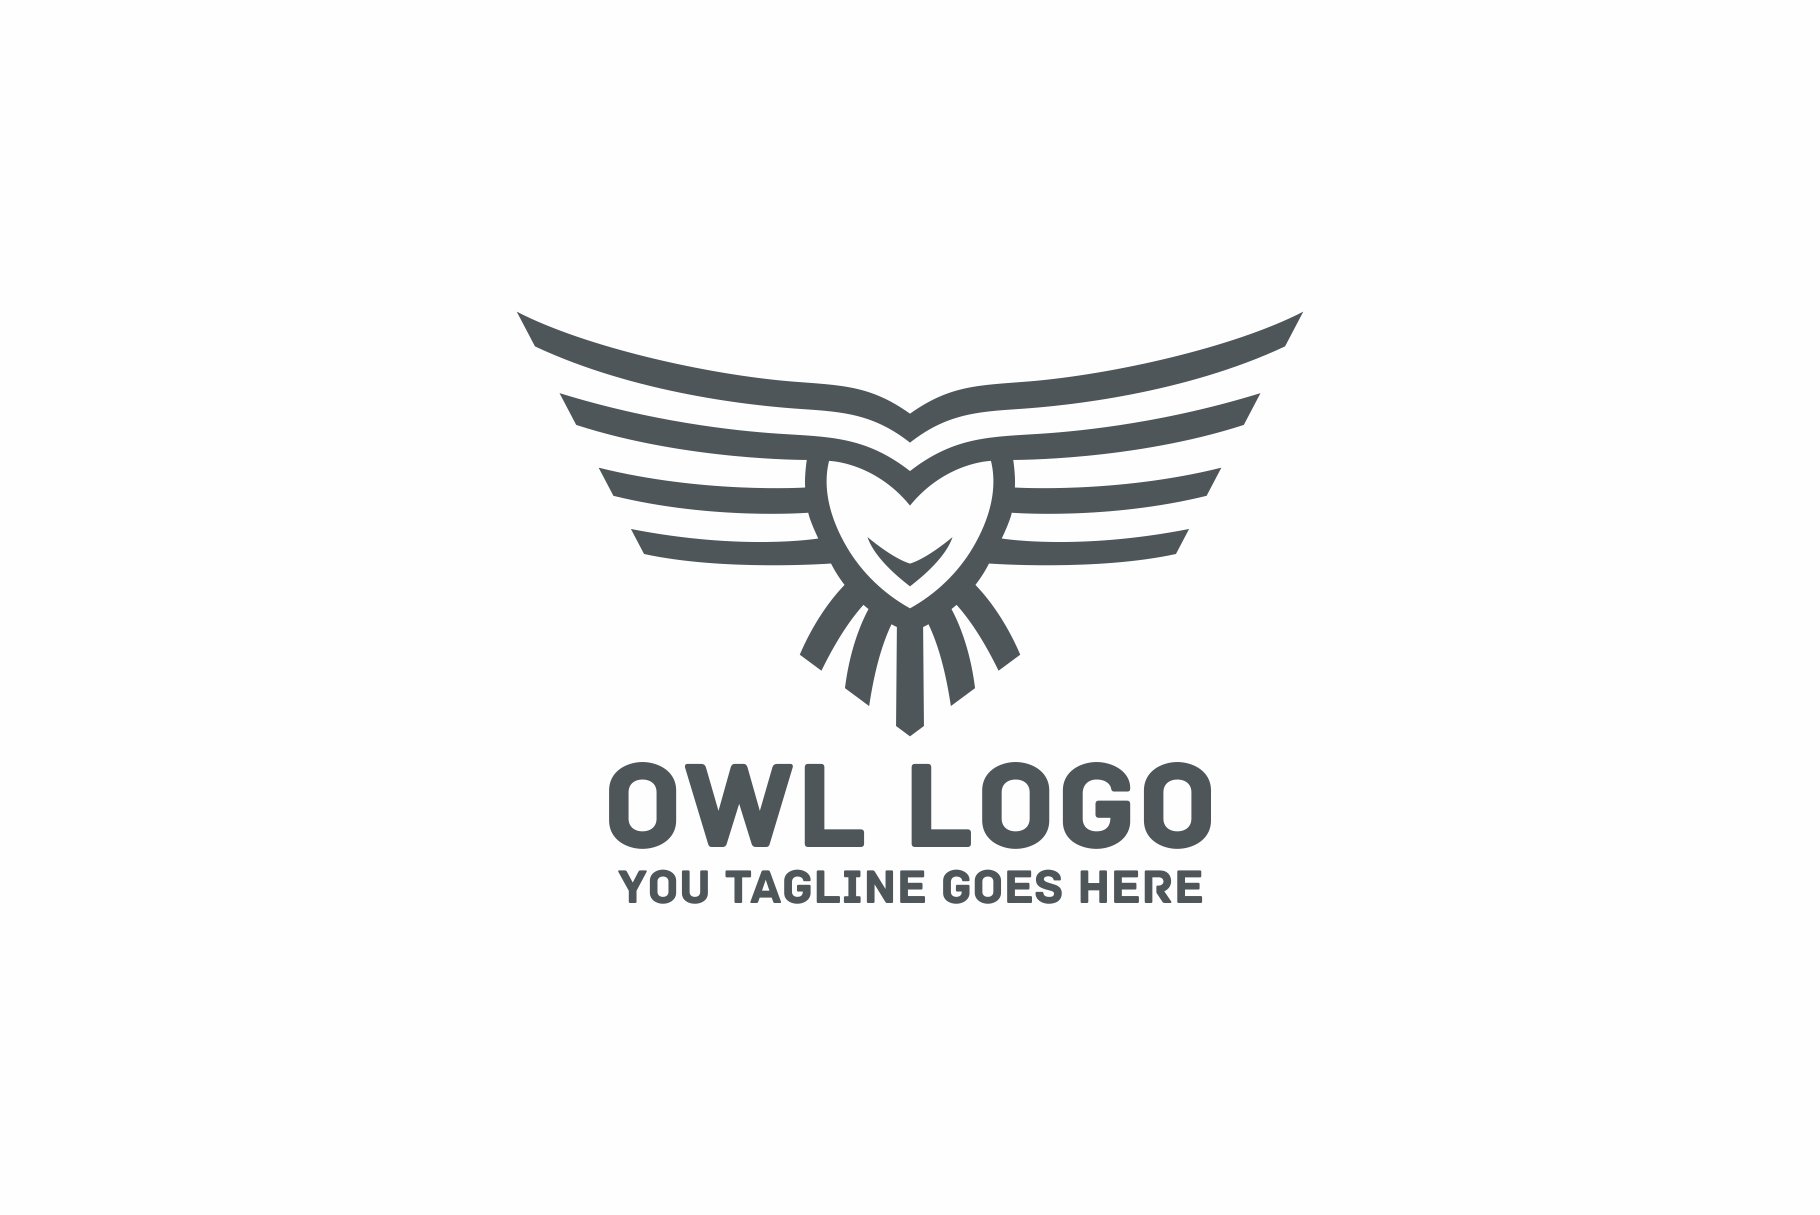 Fly Owl Logo cover image.